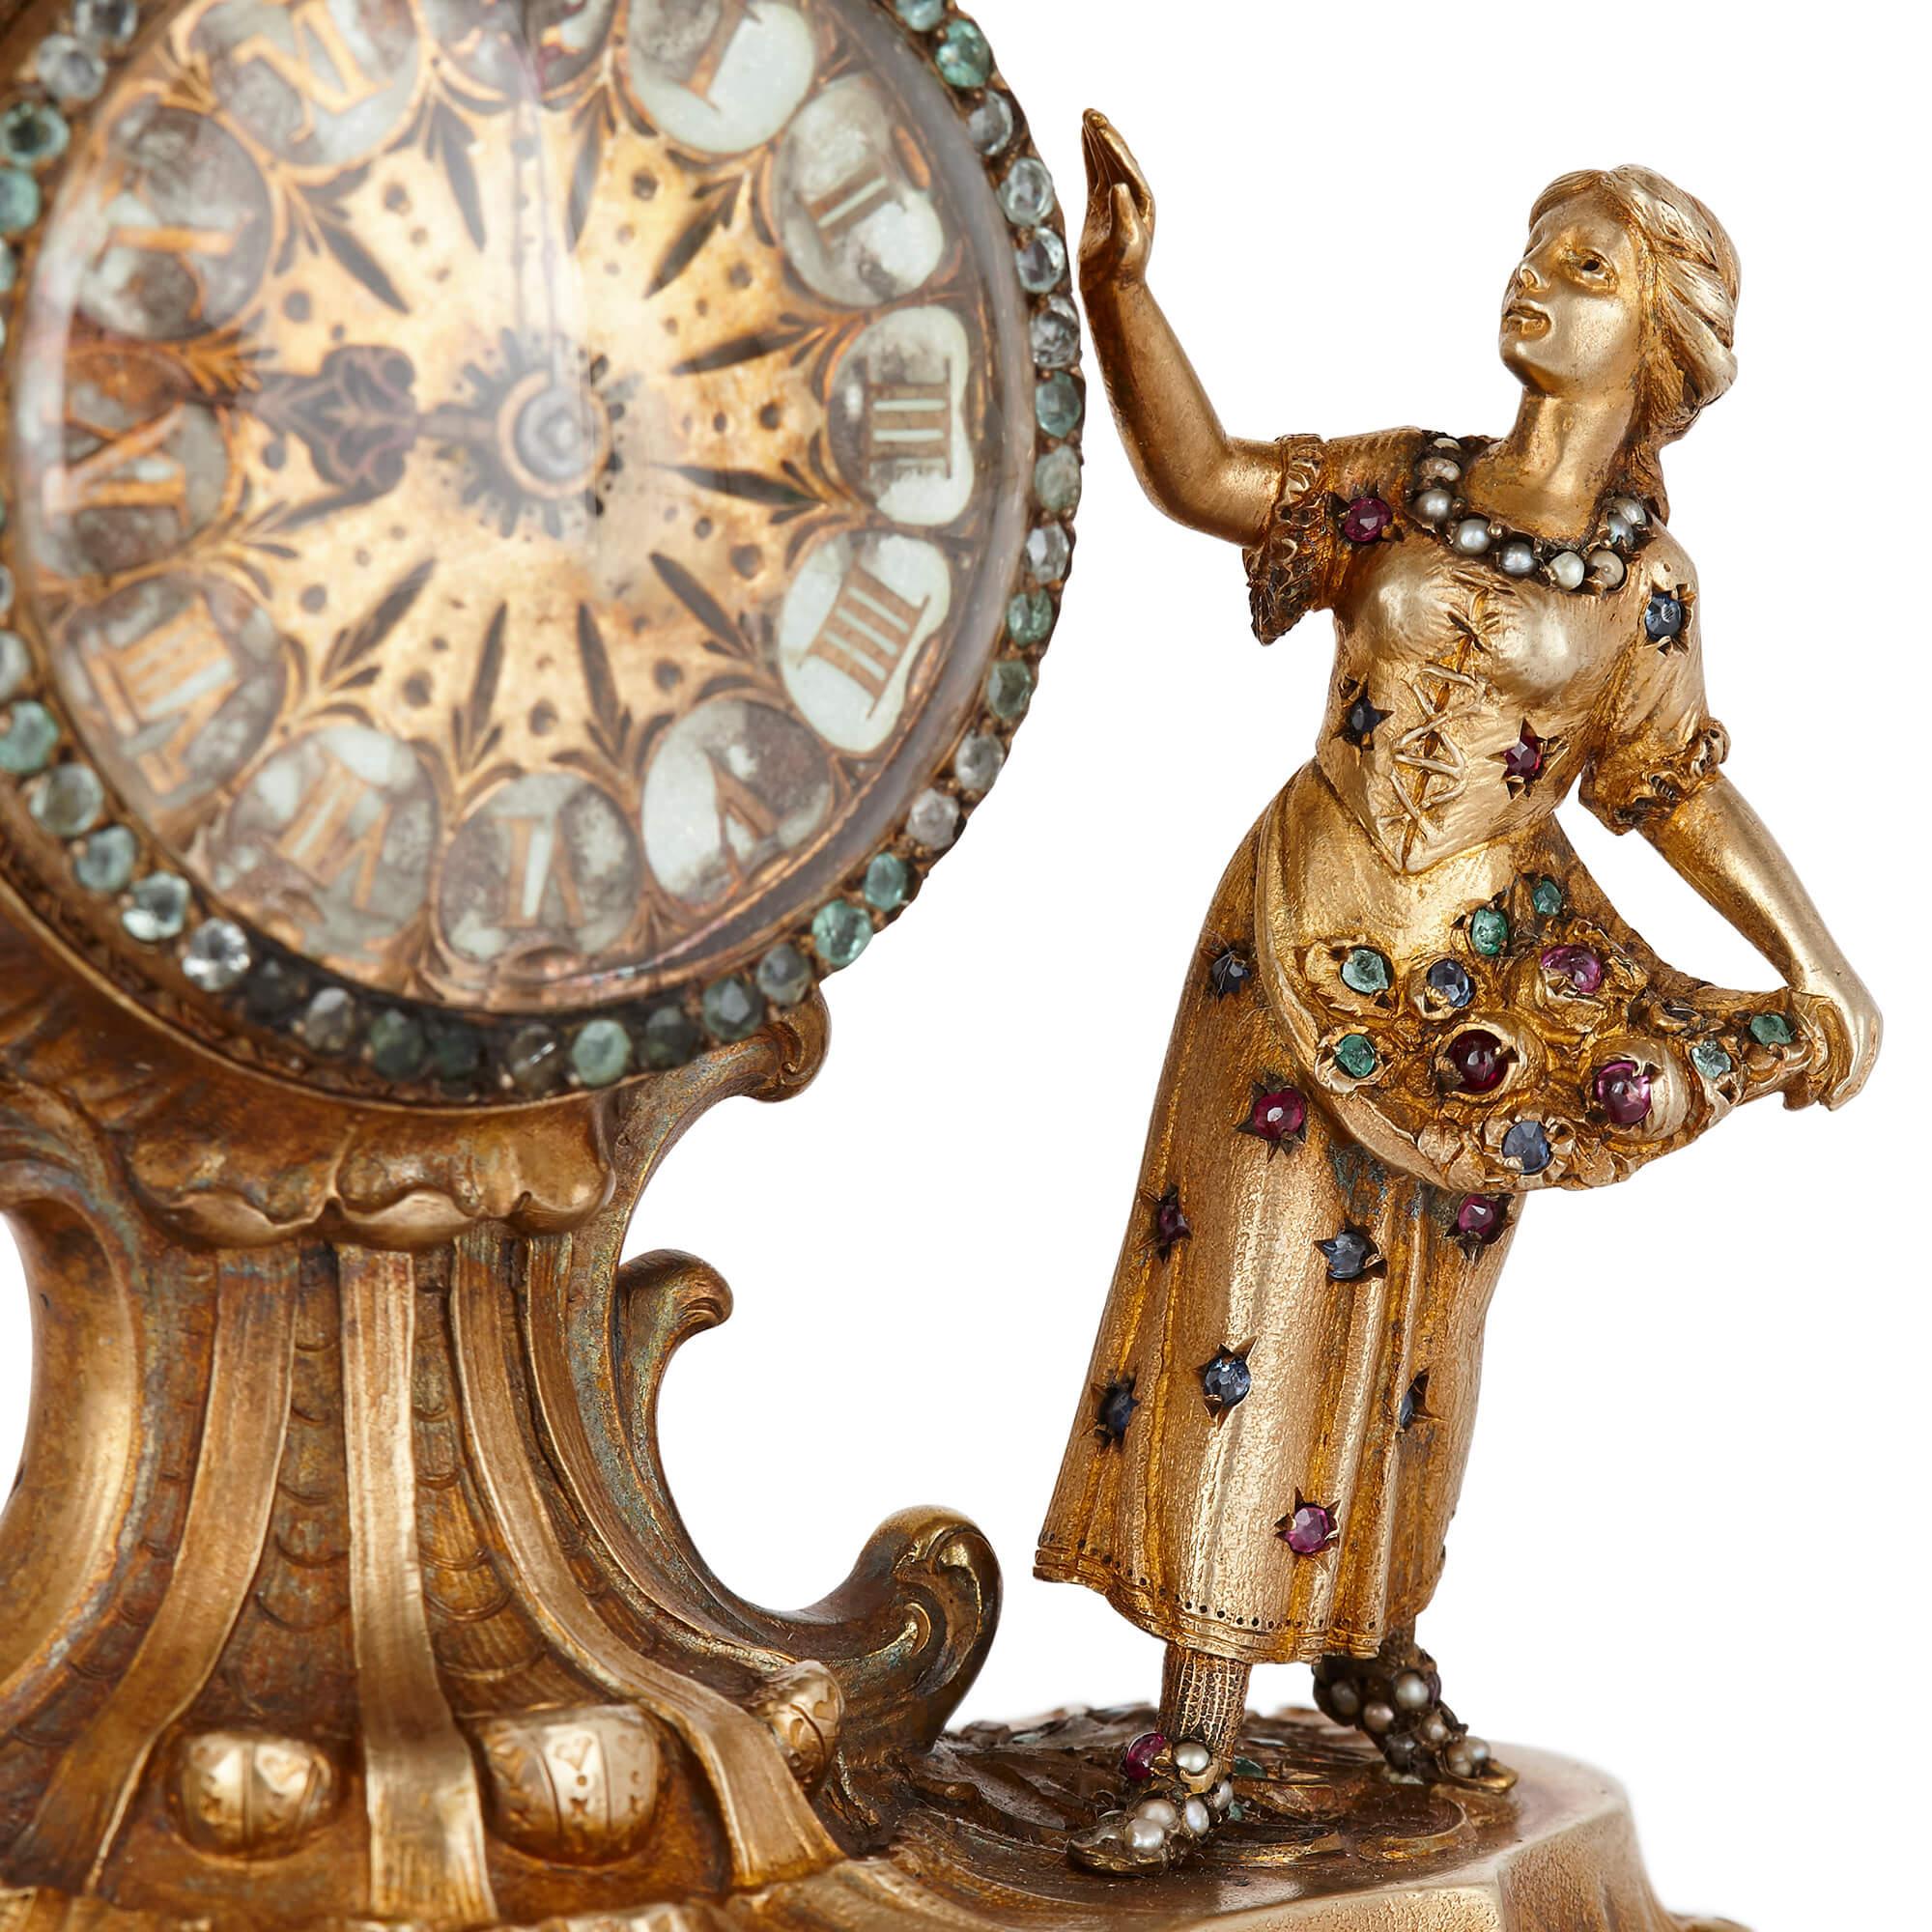 19th Century Austrian Jewel Encrusted Silver Gilt Clock In Good Condition For Sale In London, GB